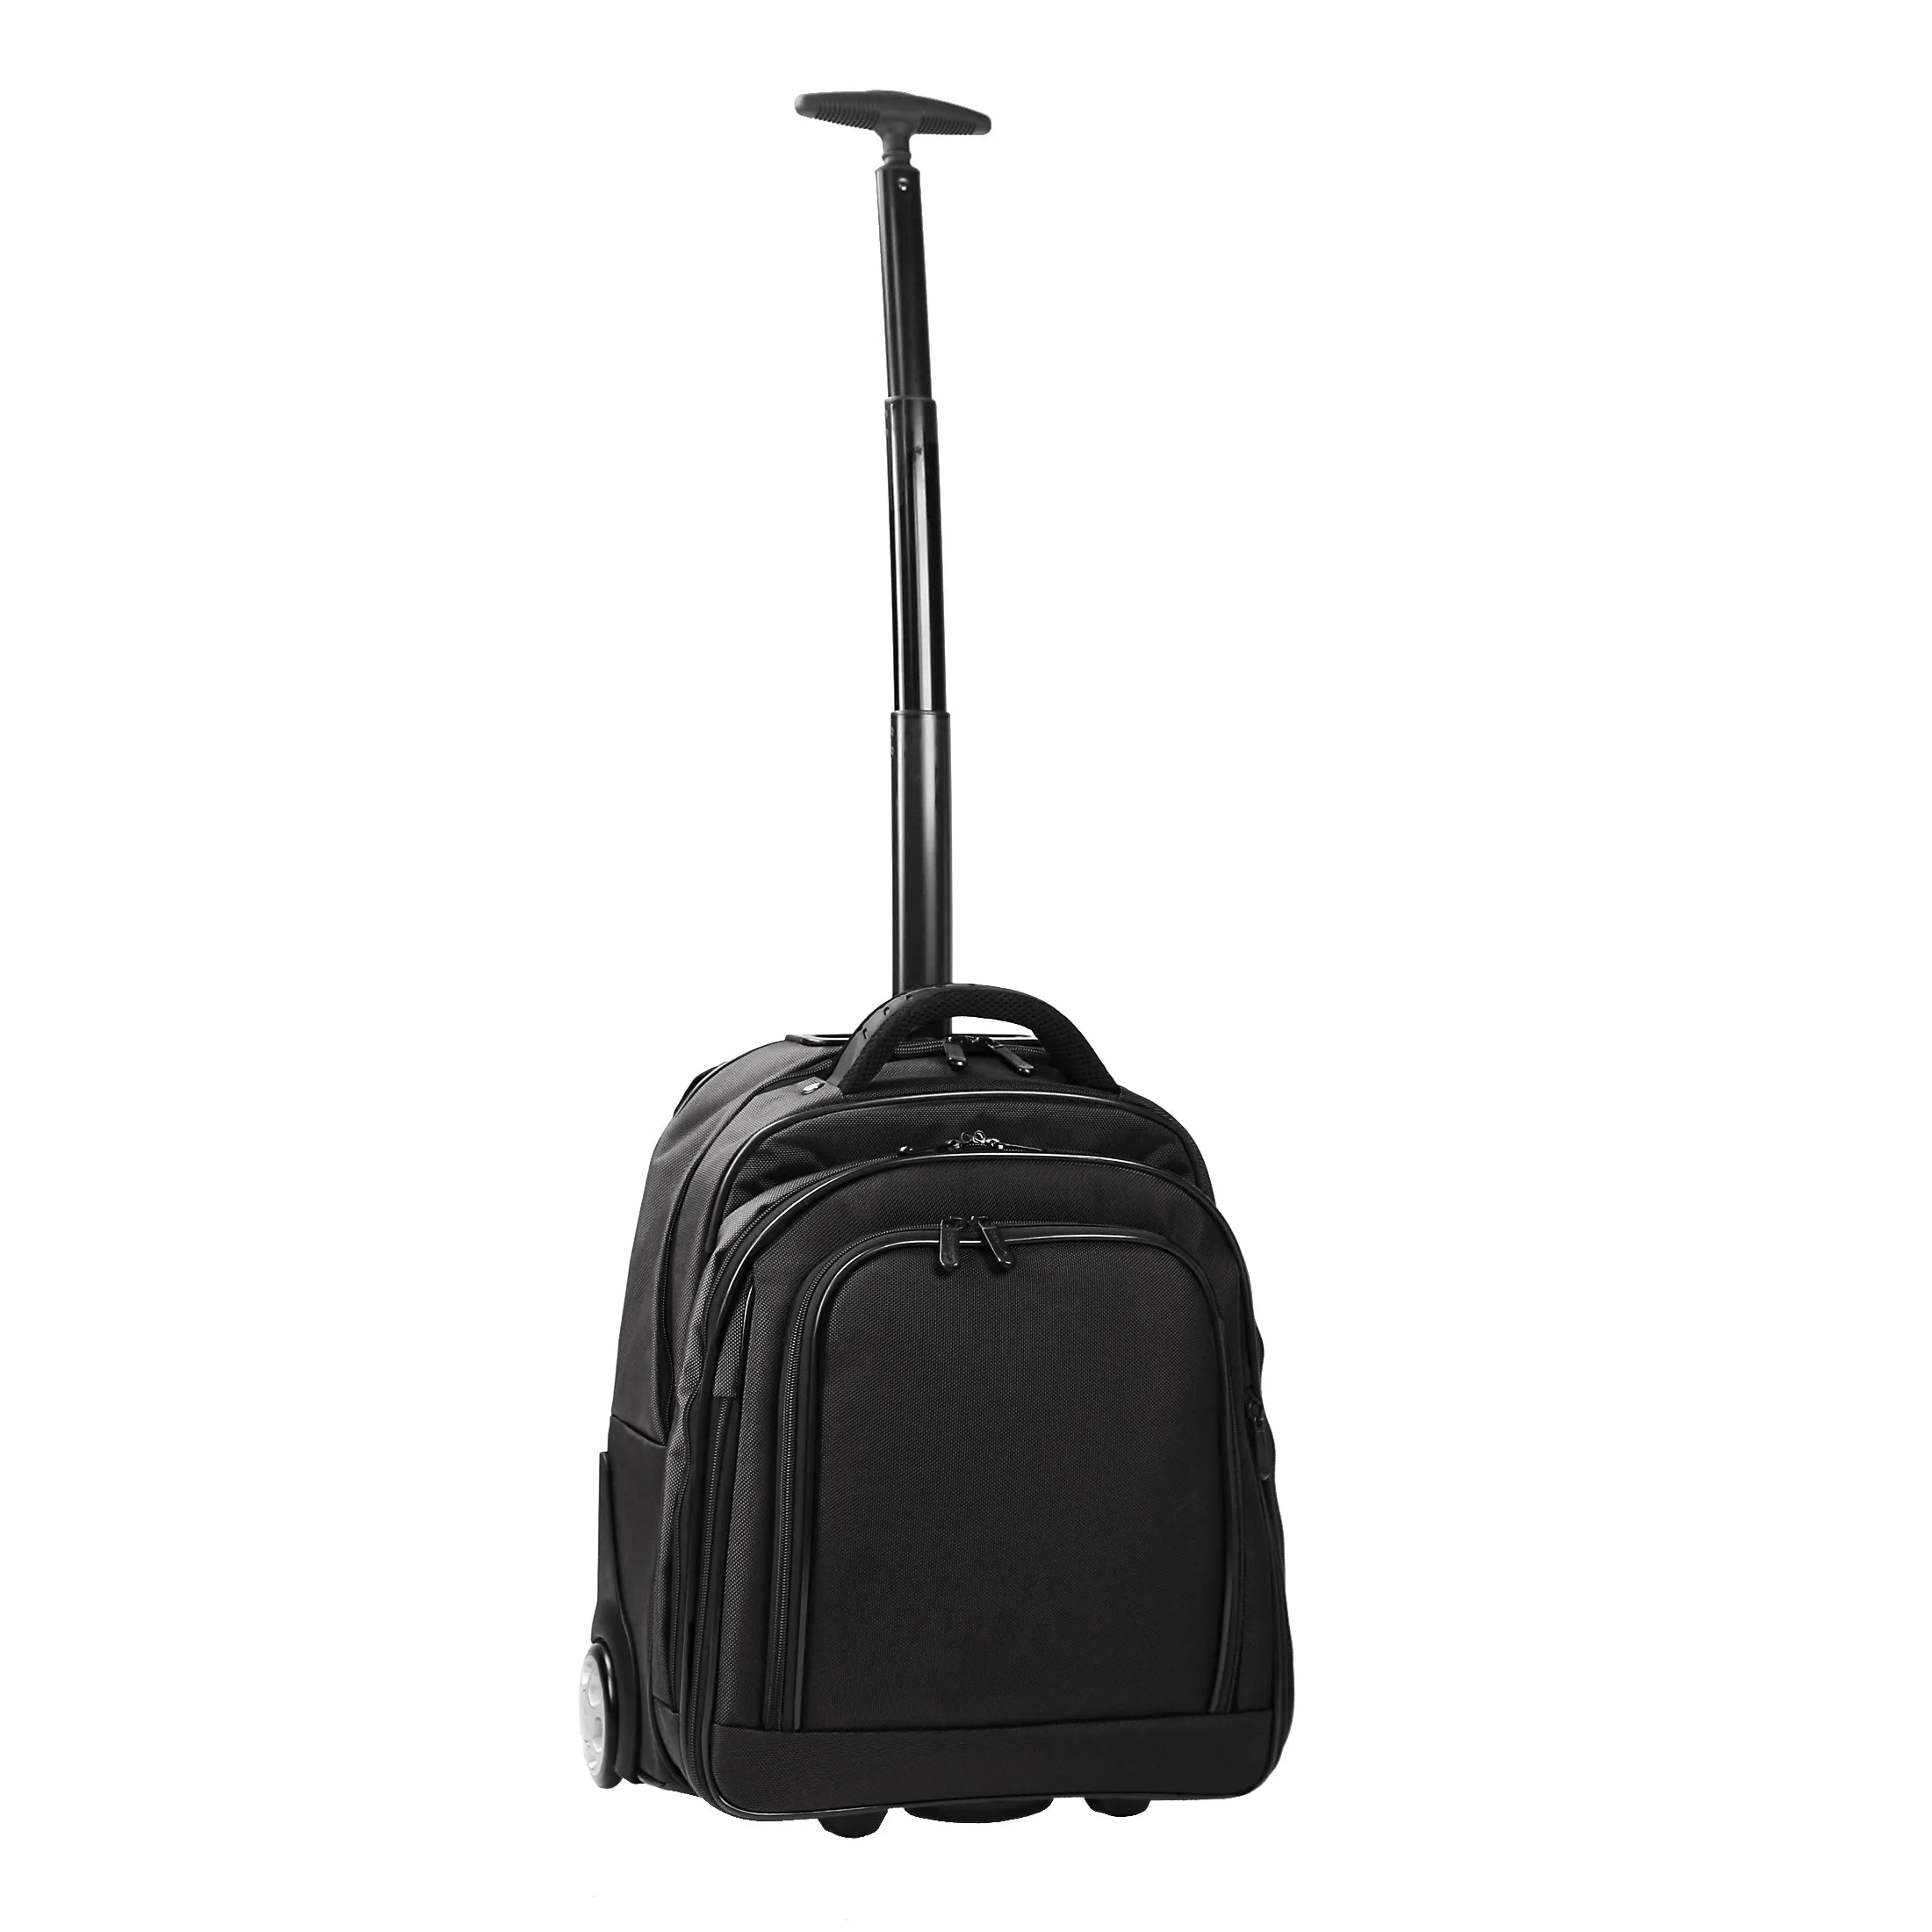 Dermata Business Mobile Office with backpack function - black